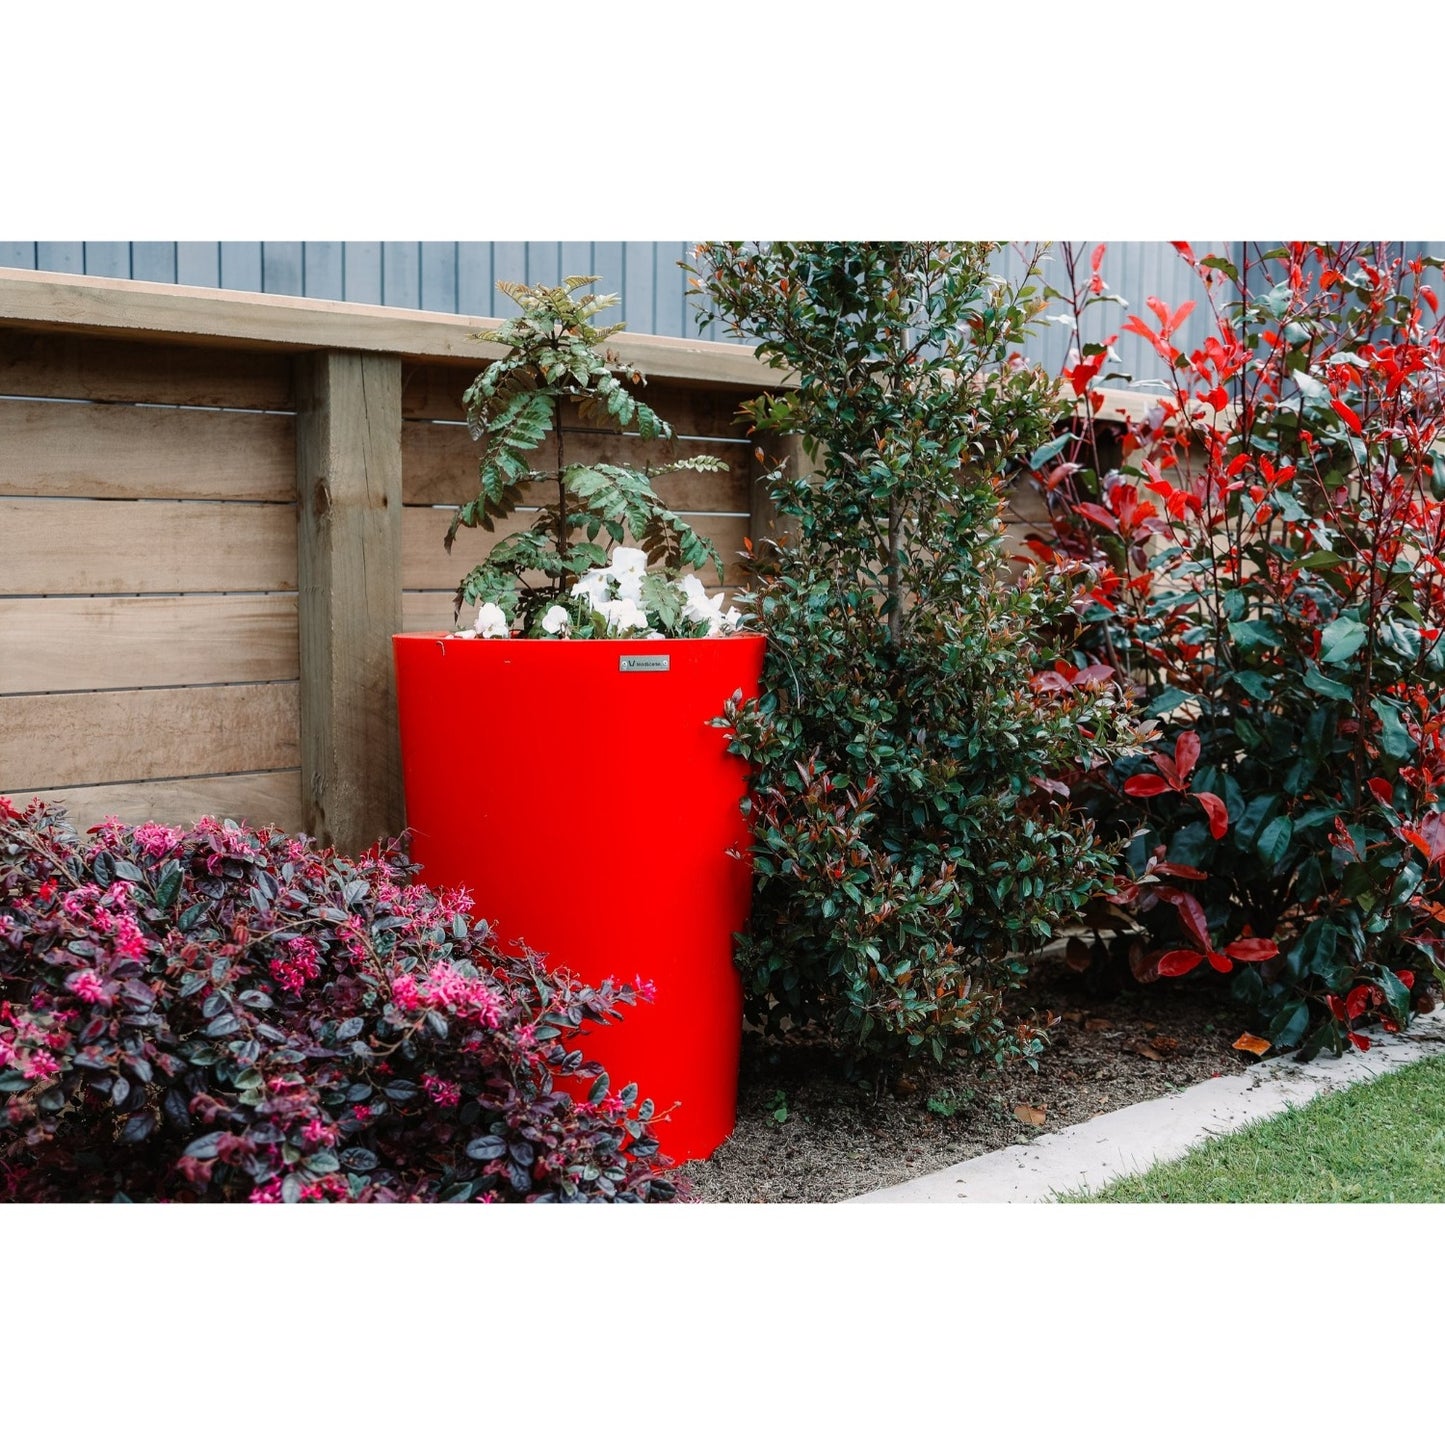 A stunning red planter pot sits in a garden amongst the plants.